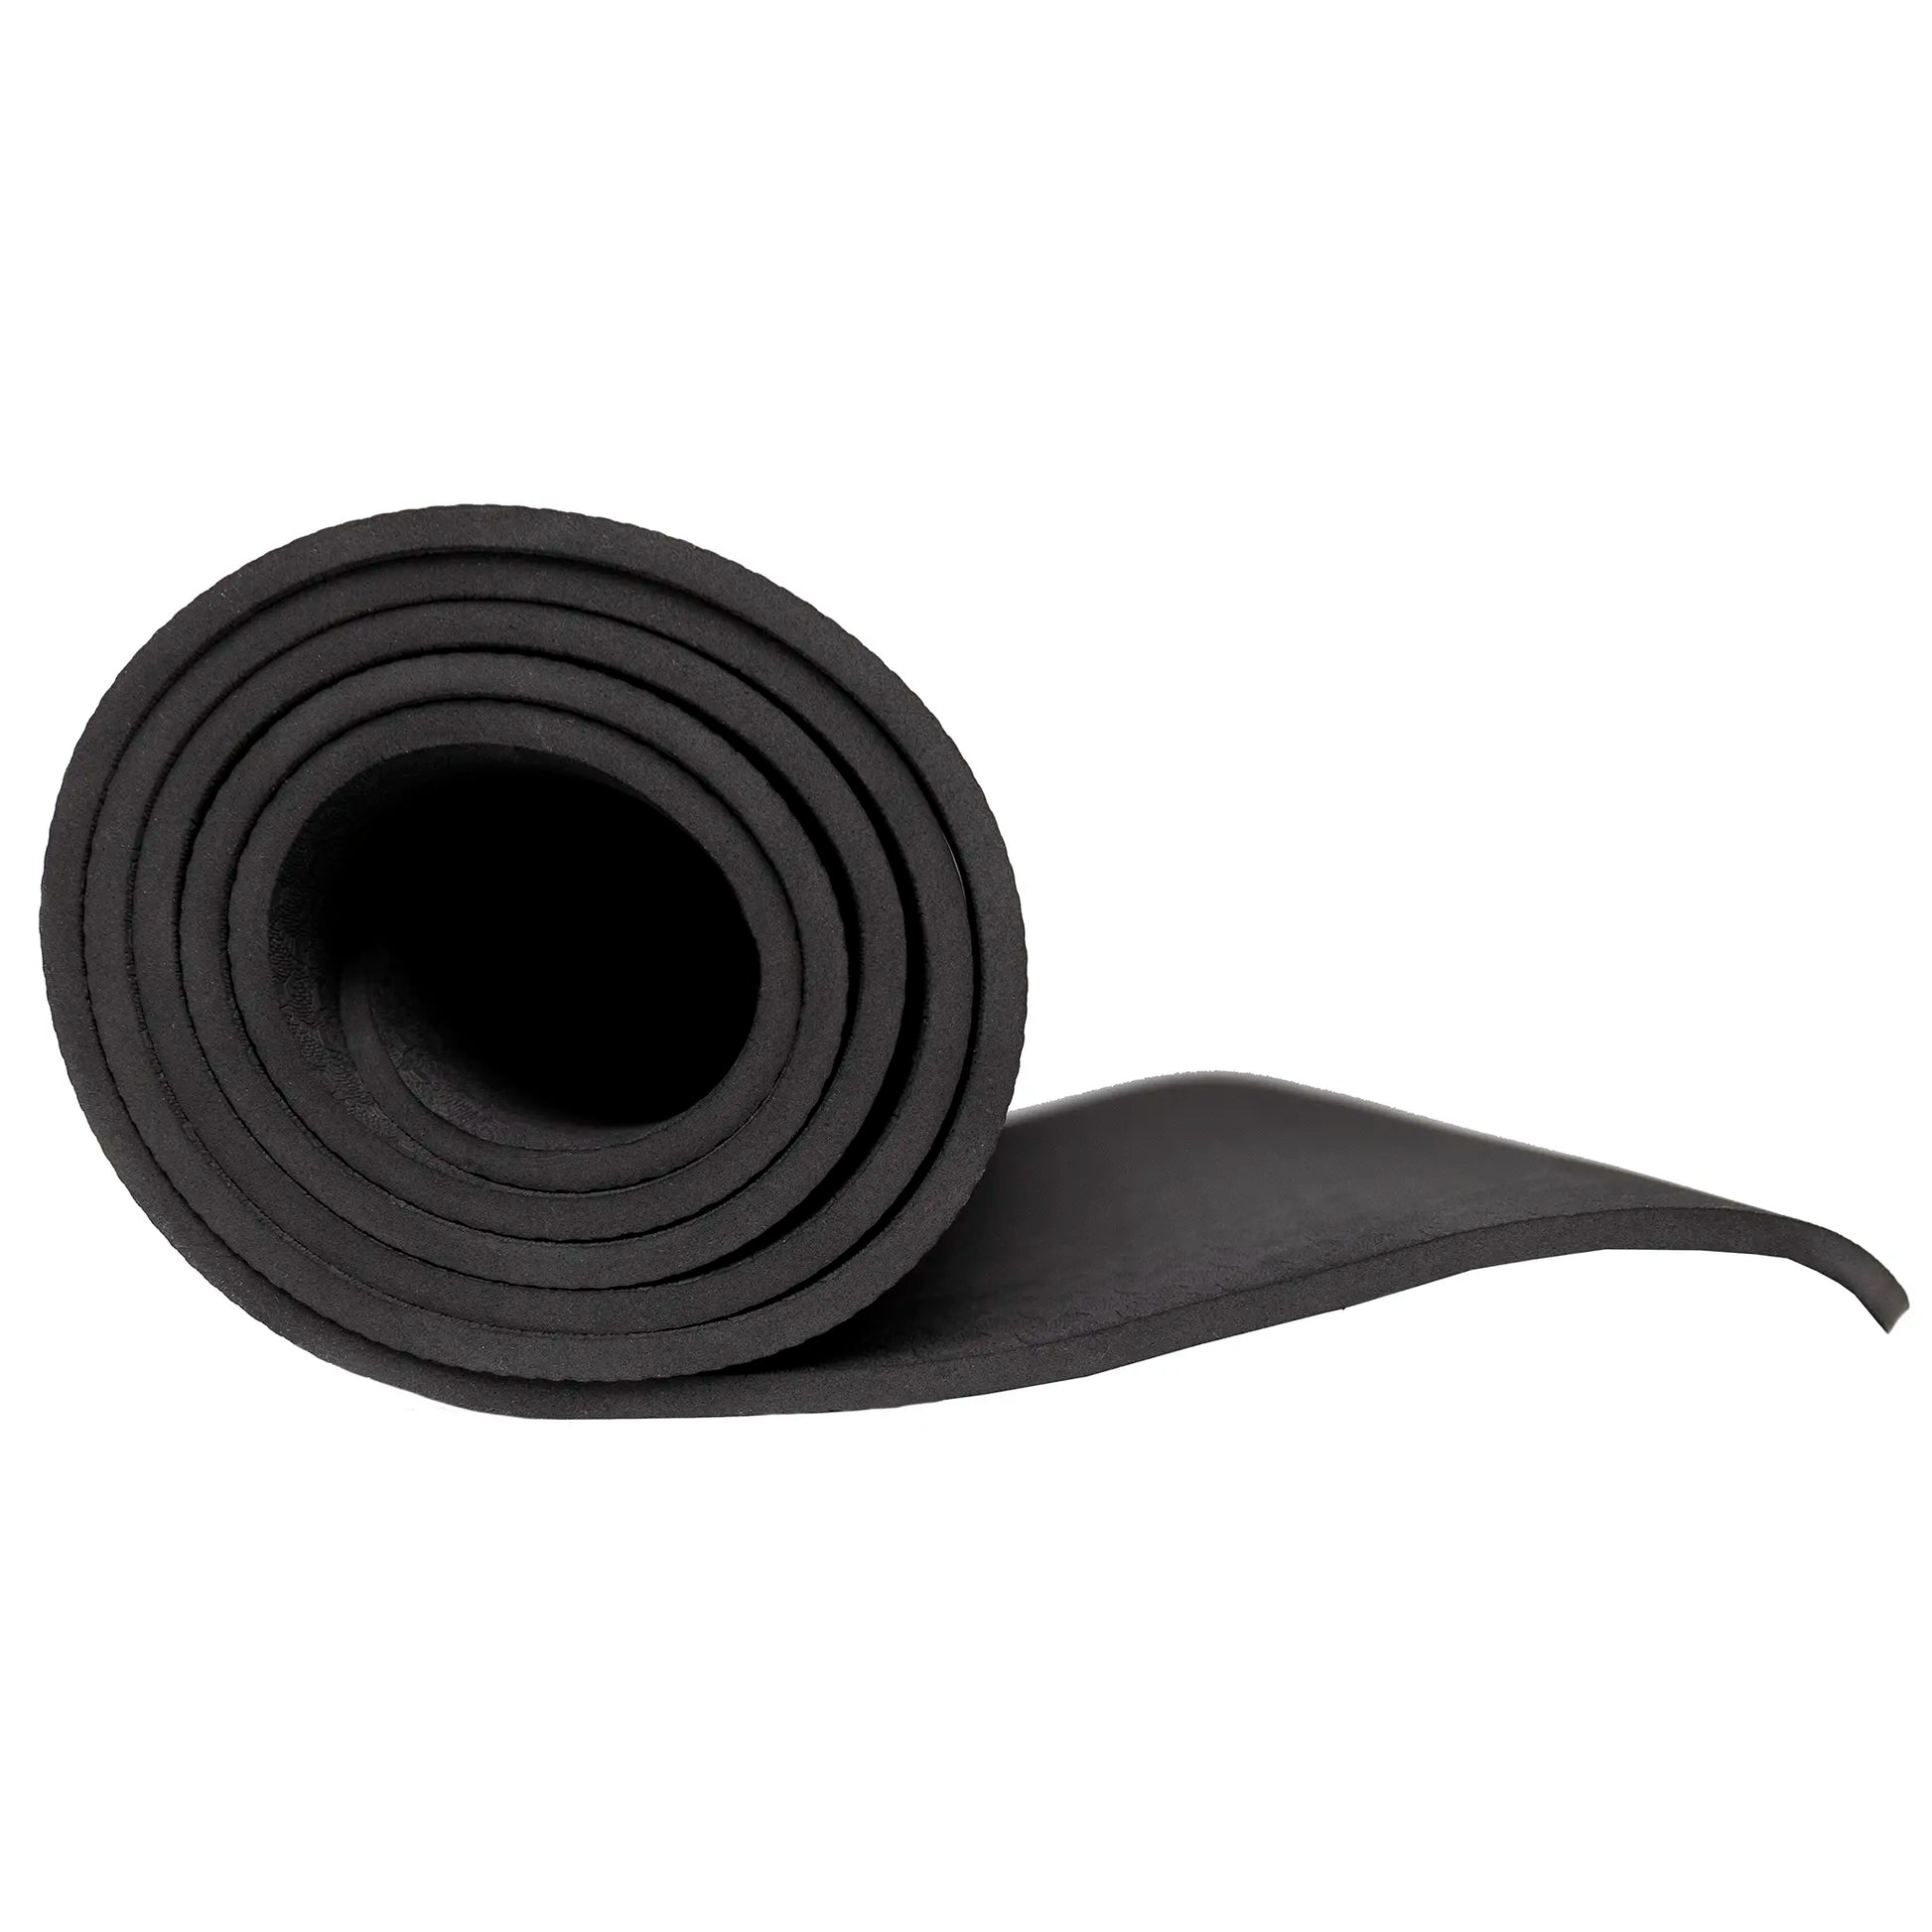 BreastEez yoga mat rolled highly durable and comfortable in black